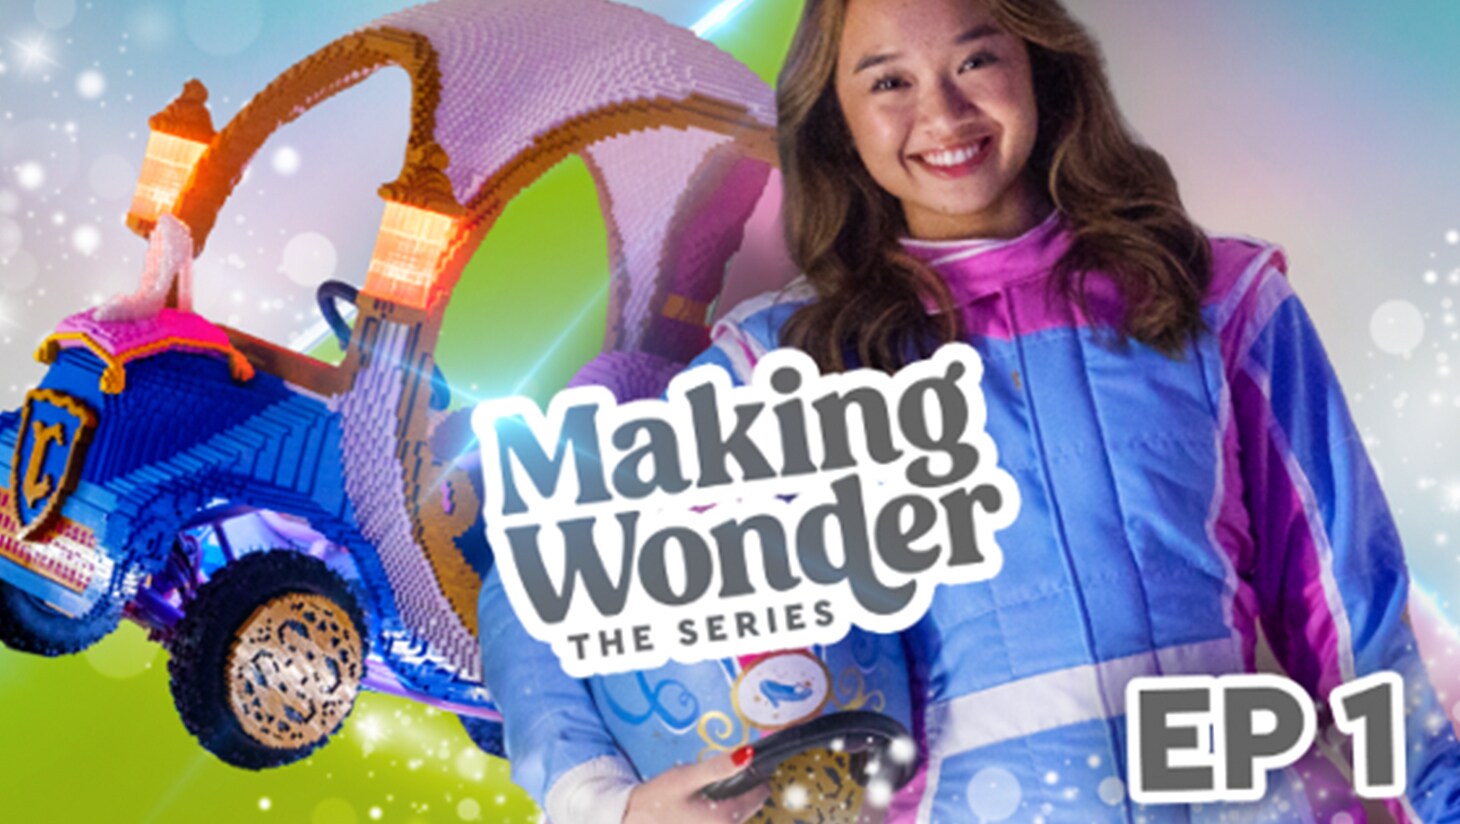 Making Wonder The Series | Ep 1 | Image of a girl in a pink and blue racing jumpsuit at the forefront; behind her is a go kart made of LEGO bricks.